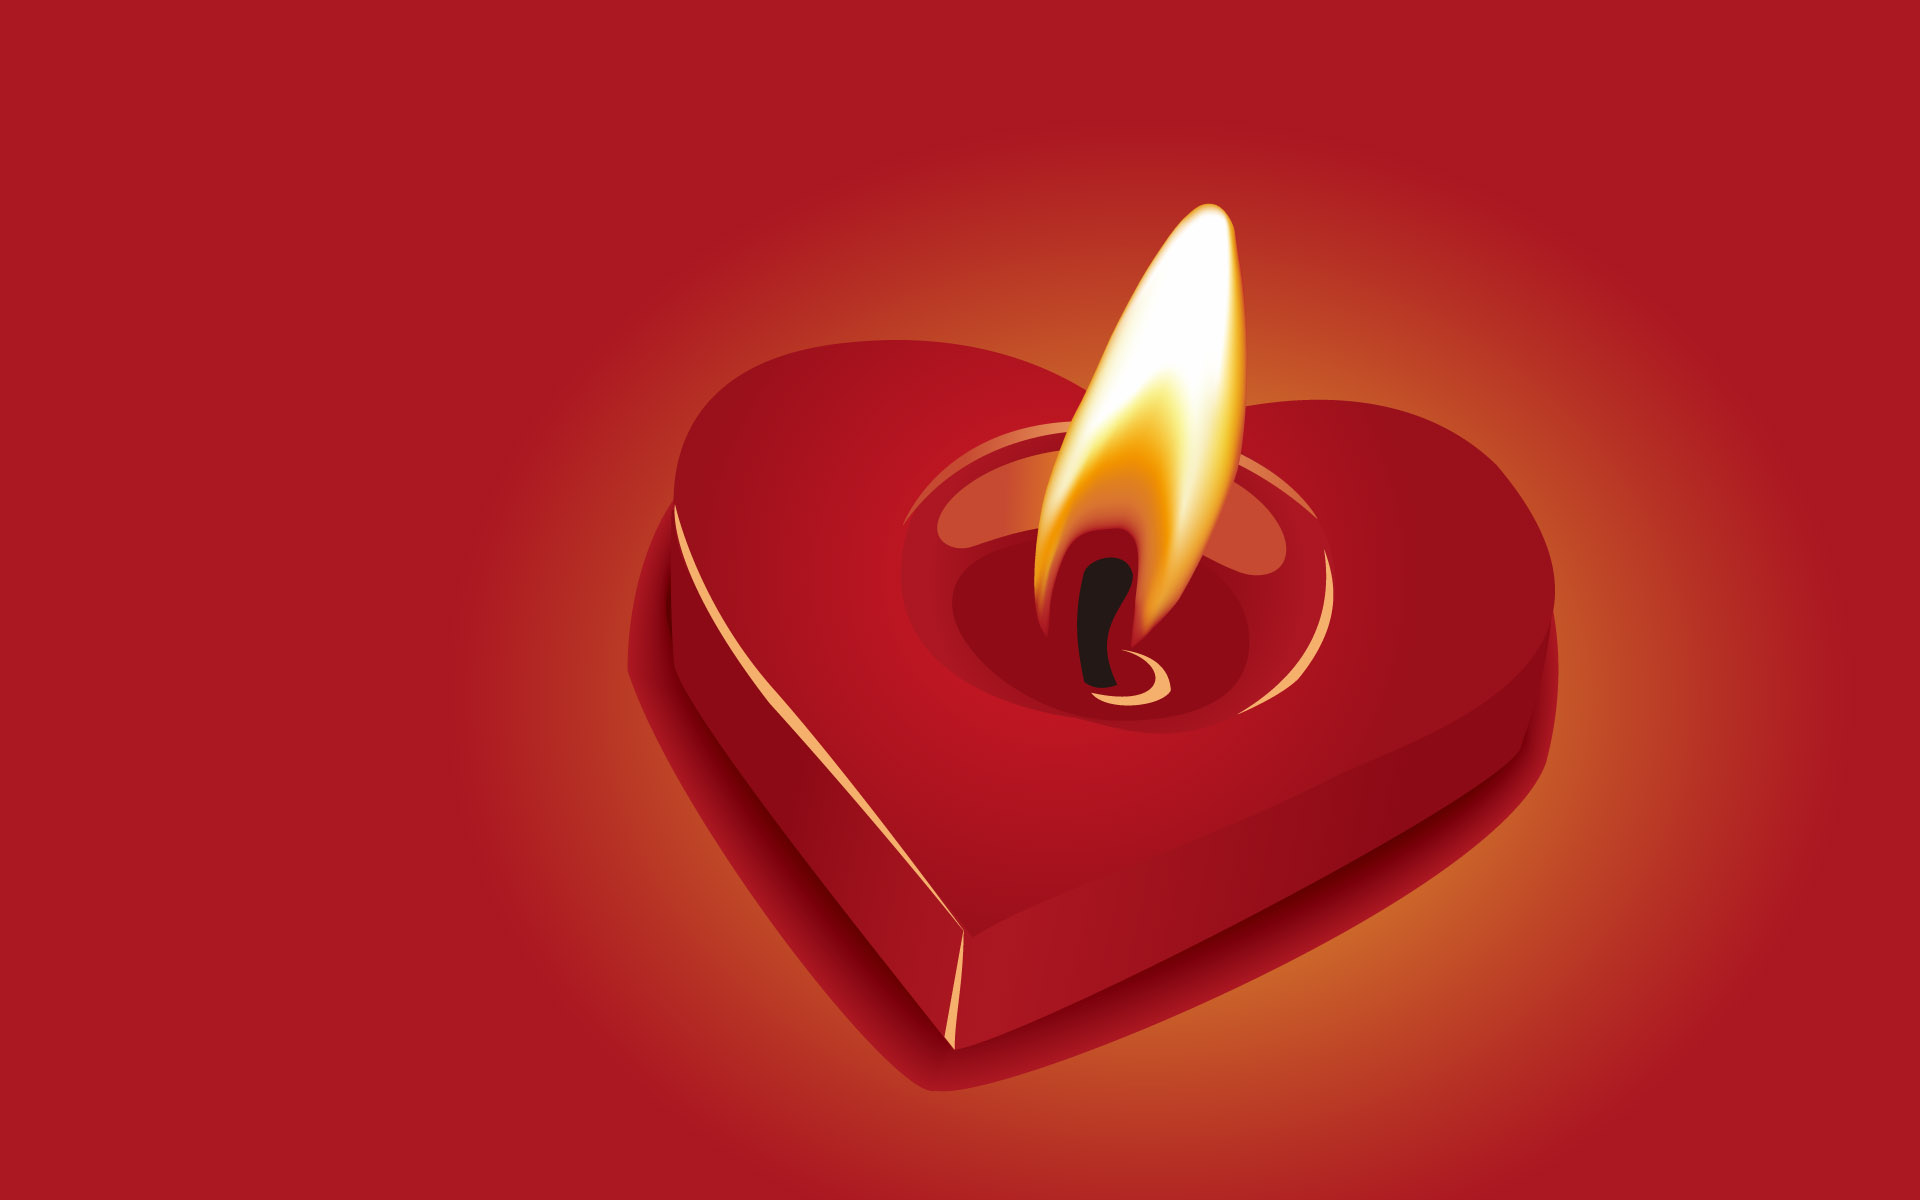 Heart shaped candle wallpapers | Heart shaped candle stock photos